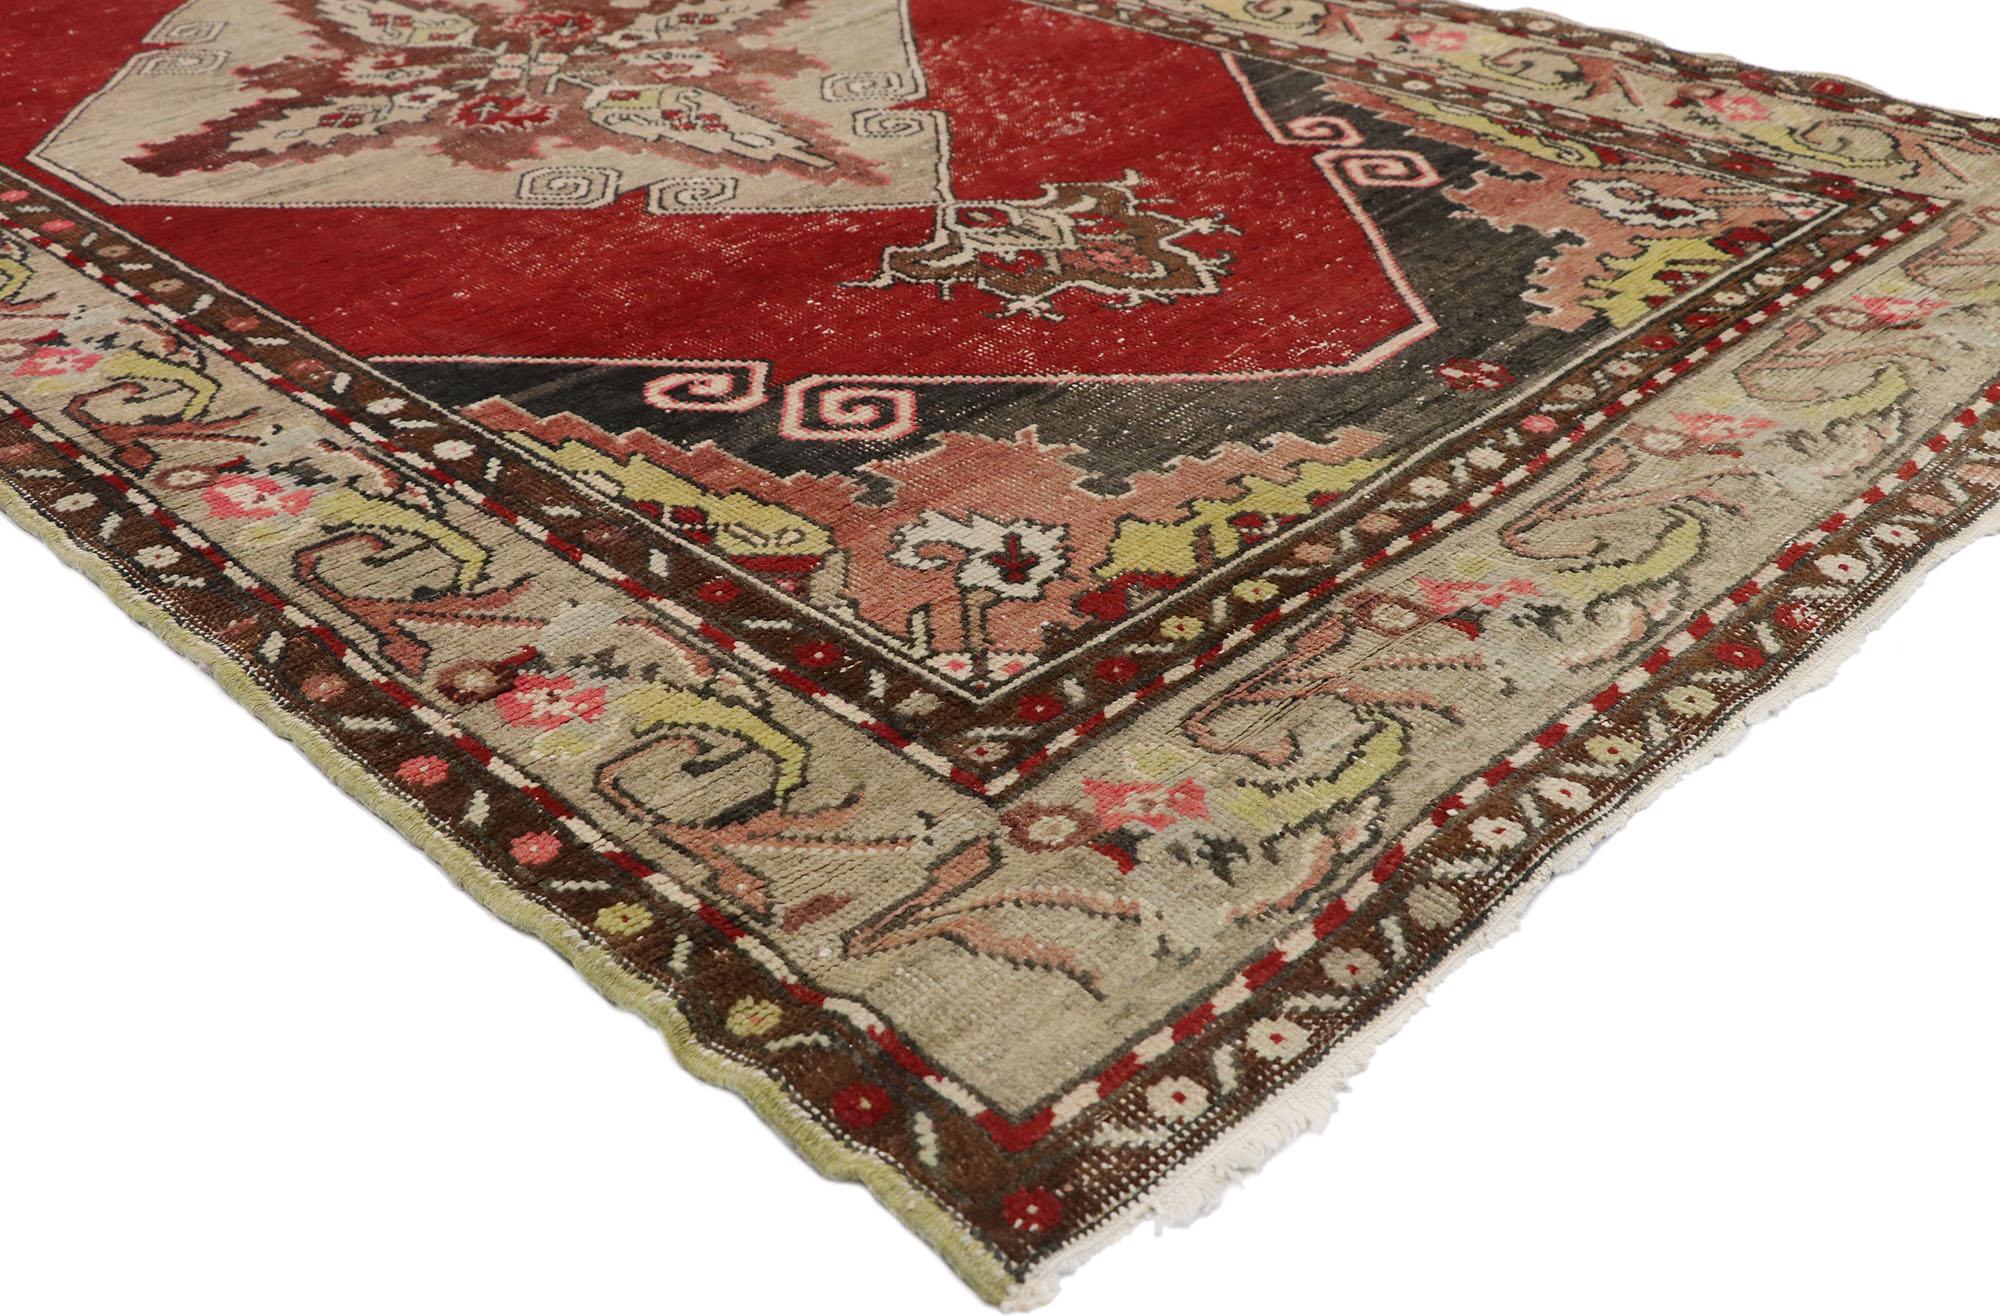 73674 Vintage Red Turkish Oushak Rug Runner, 03'07 x 11'07. Turkish Oushak carpet runners epitomize a unique style of traditional rugs that trace their roots back to the Oushak region in western Turkey. Renowned for their elaborate designs, these